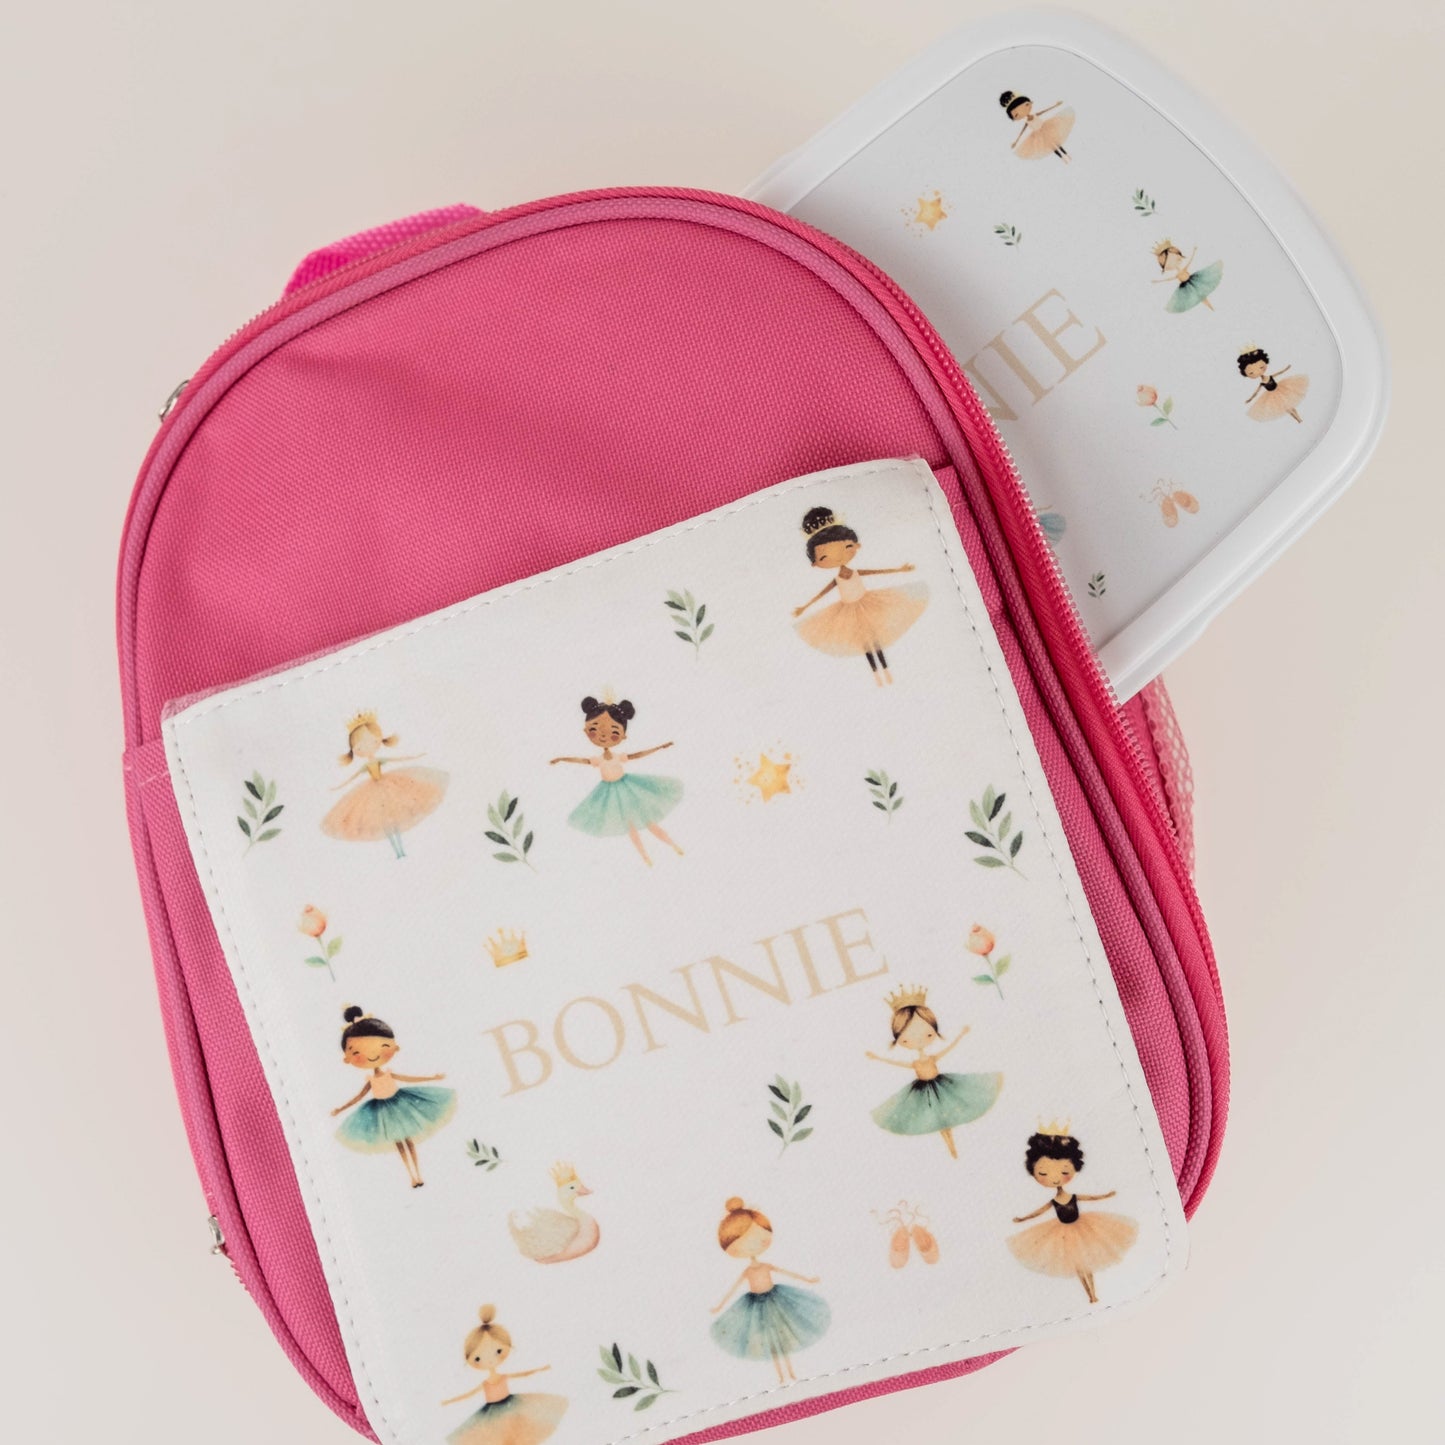 Children’s Personalised Lunch Bag and Box - Farm Design